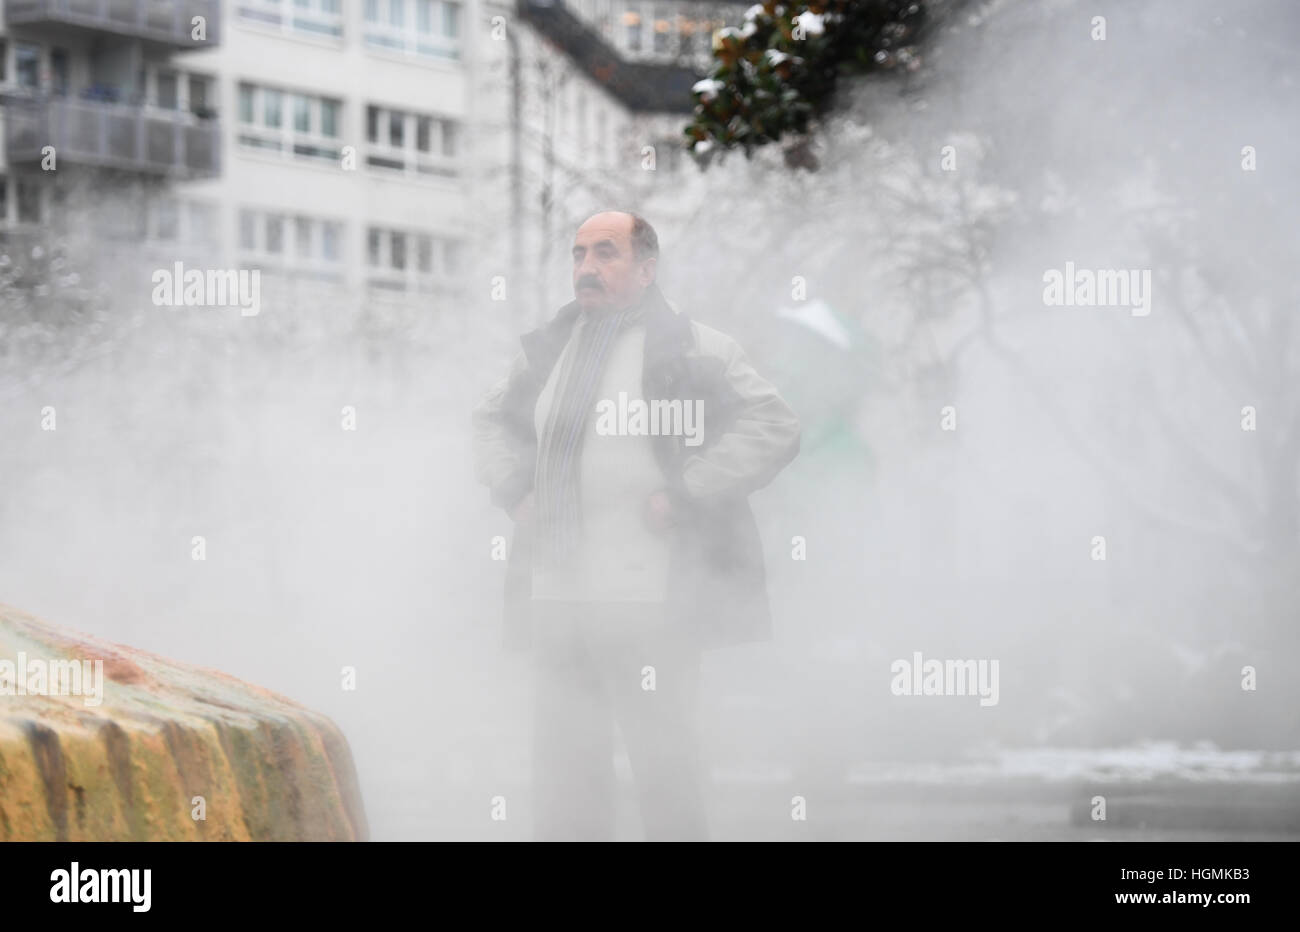 Wiesbaden, Germany. 11th Jan, 2017. Musa Adan from Wiesbaden is clouded in steam and fog at the 'Kochbrunnen' (lit. 'boil fountain') in Wiesbaden, Germany, 11 January 2017. The shell shaped fountain is a frequented site for people attuned to their health. The hot spring spews out thermal water at 68, 75 degrees, which is considered to hold beneficial effects for human health. Photo: Arne Dedert/dpa/Alamy Live News Stock Photo